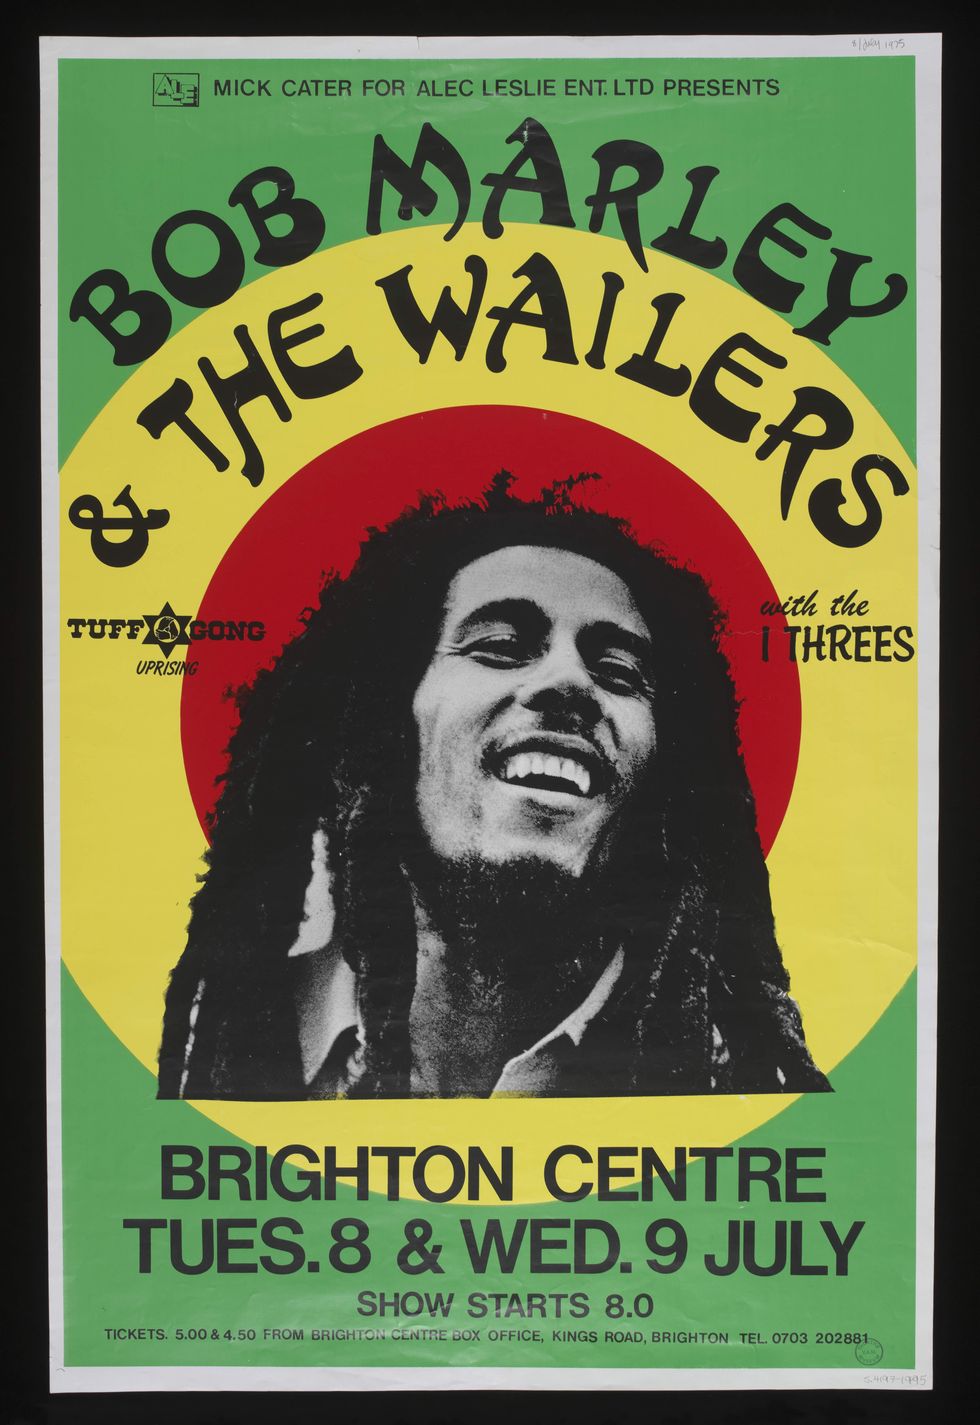 posterposter advertising the music group bob marley and the wailers at brighton centre, brighton, 19751975